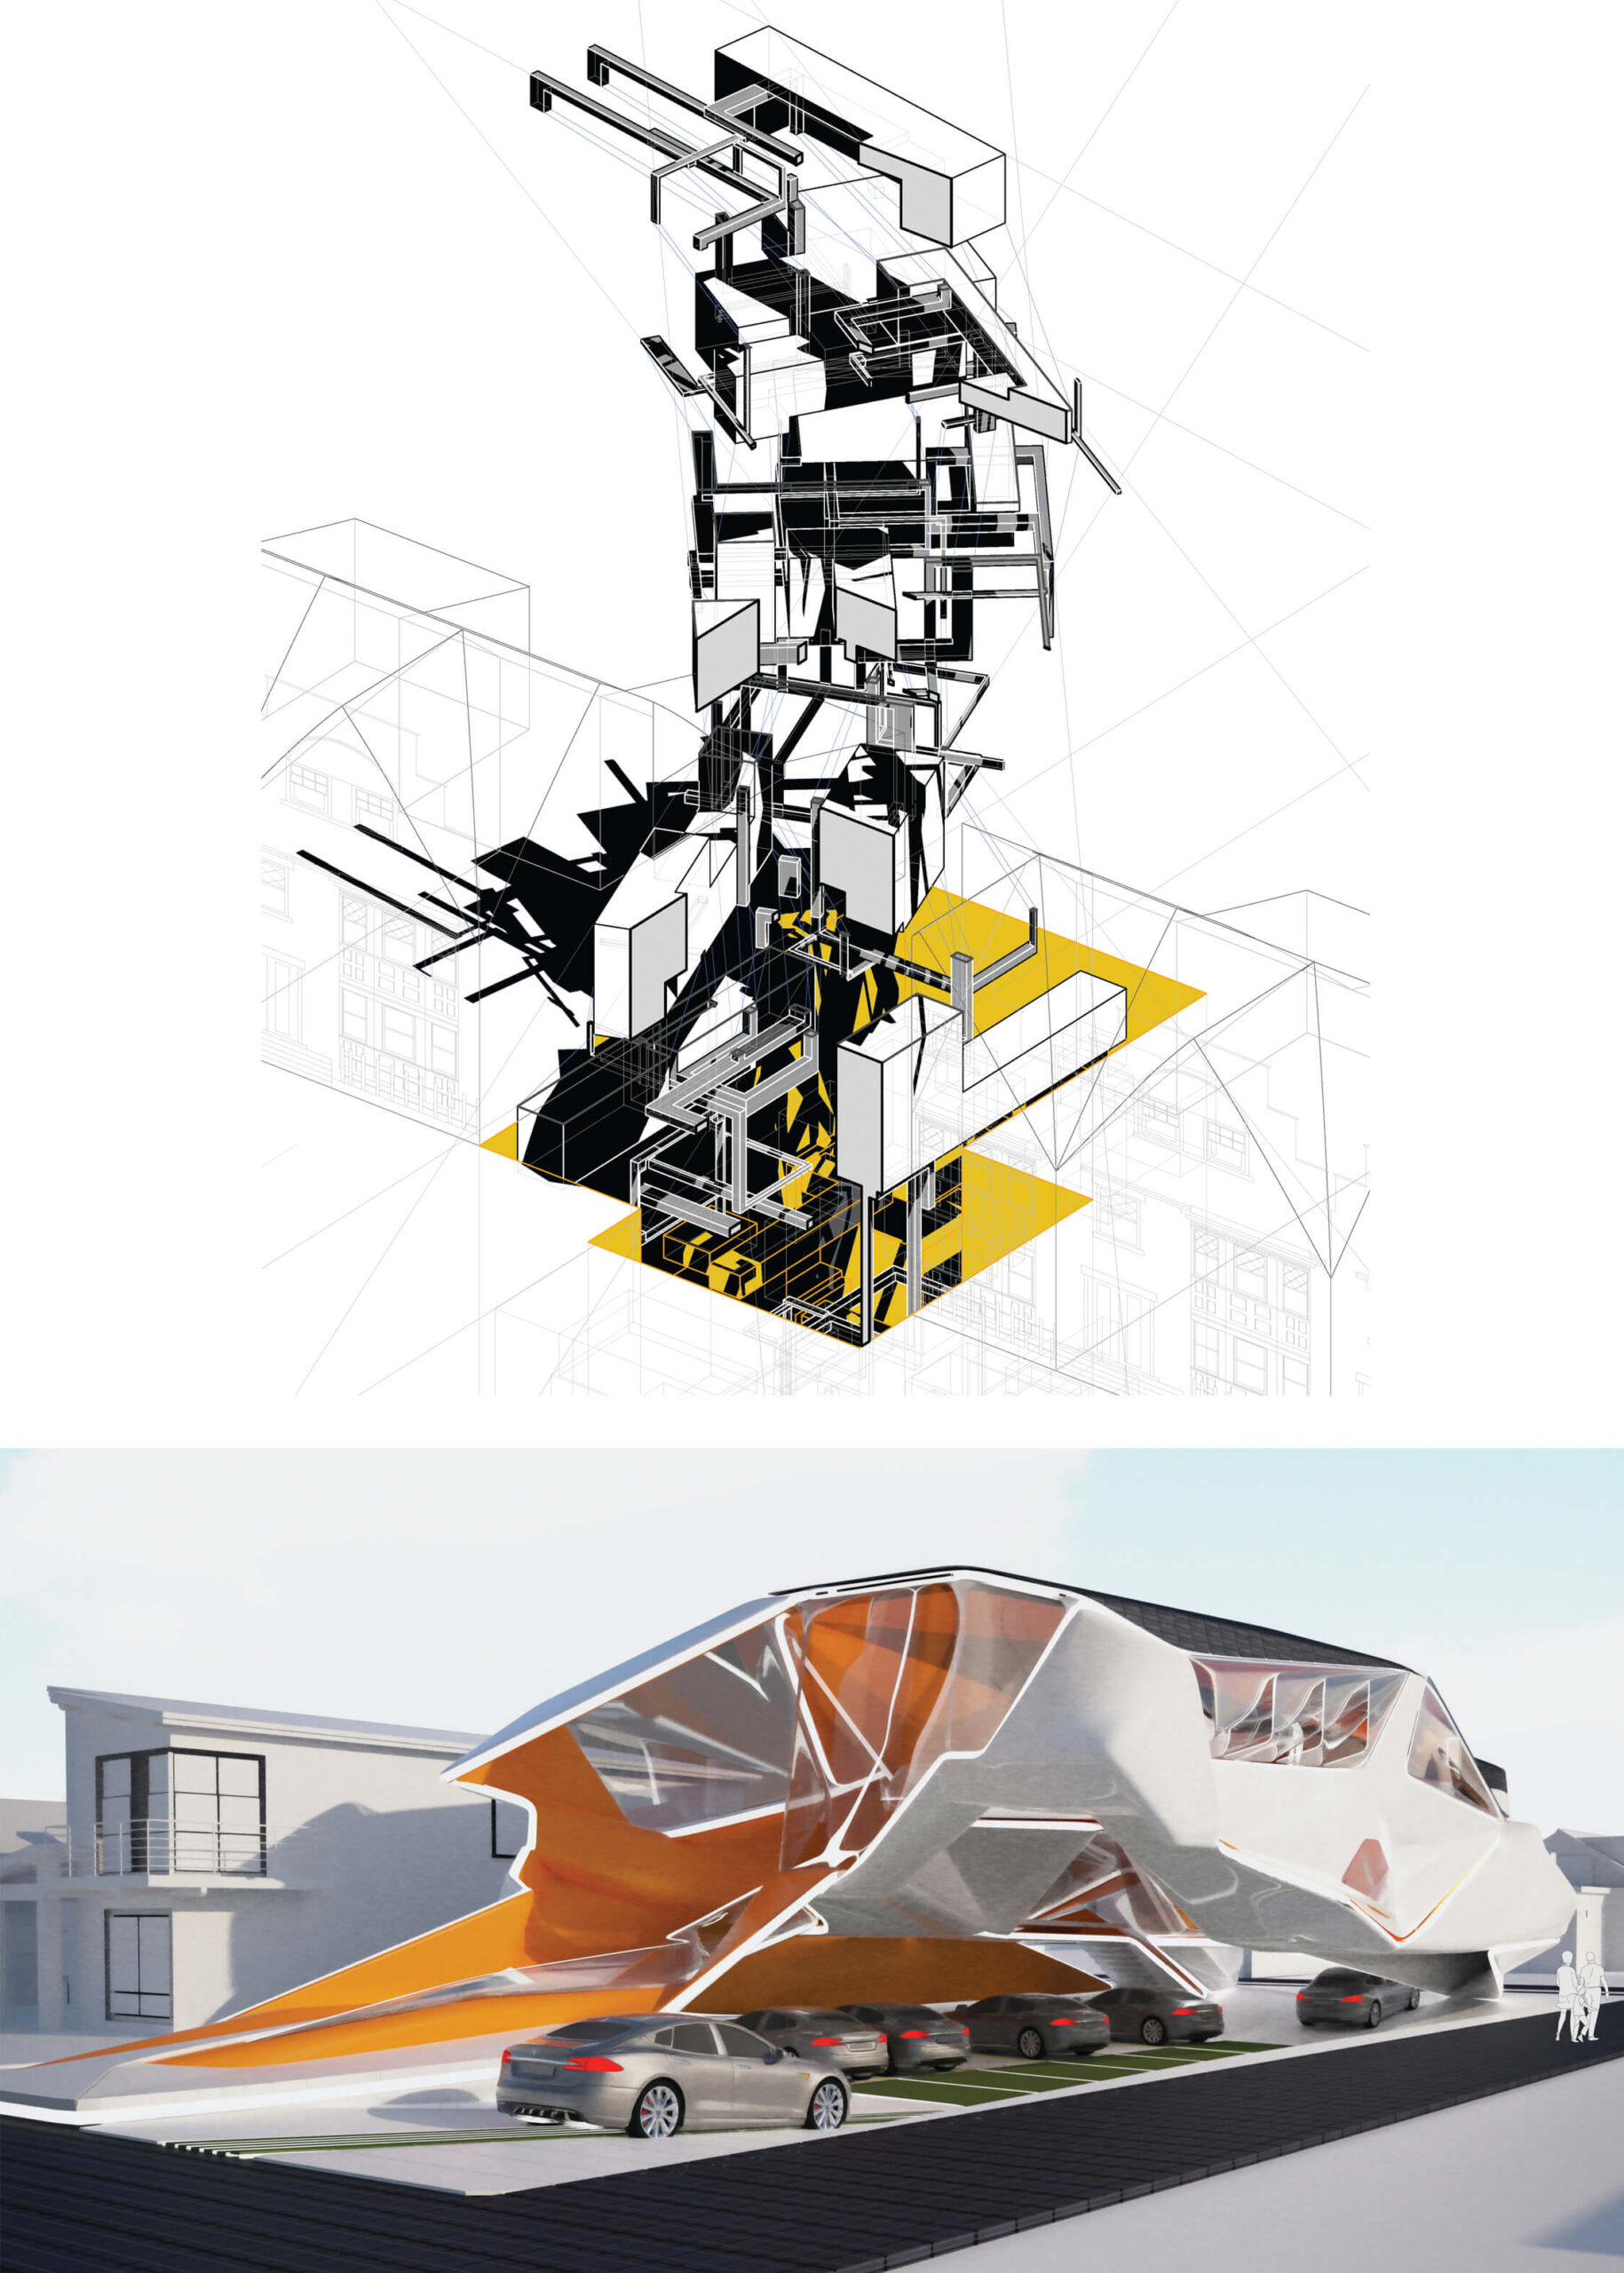 Two different architecture models. The first is the wireframe of a tower with black and yellow accents. The second is computer render of a house with an abstract shape and biomimetic structure.